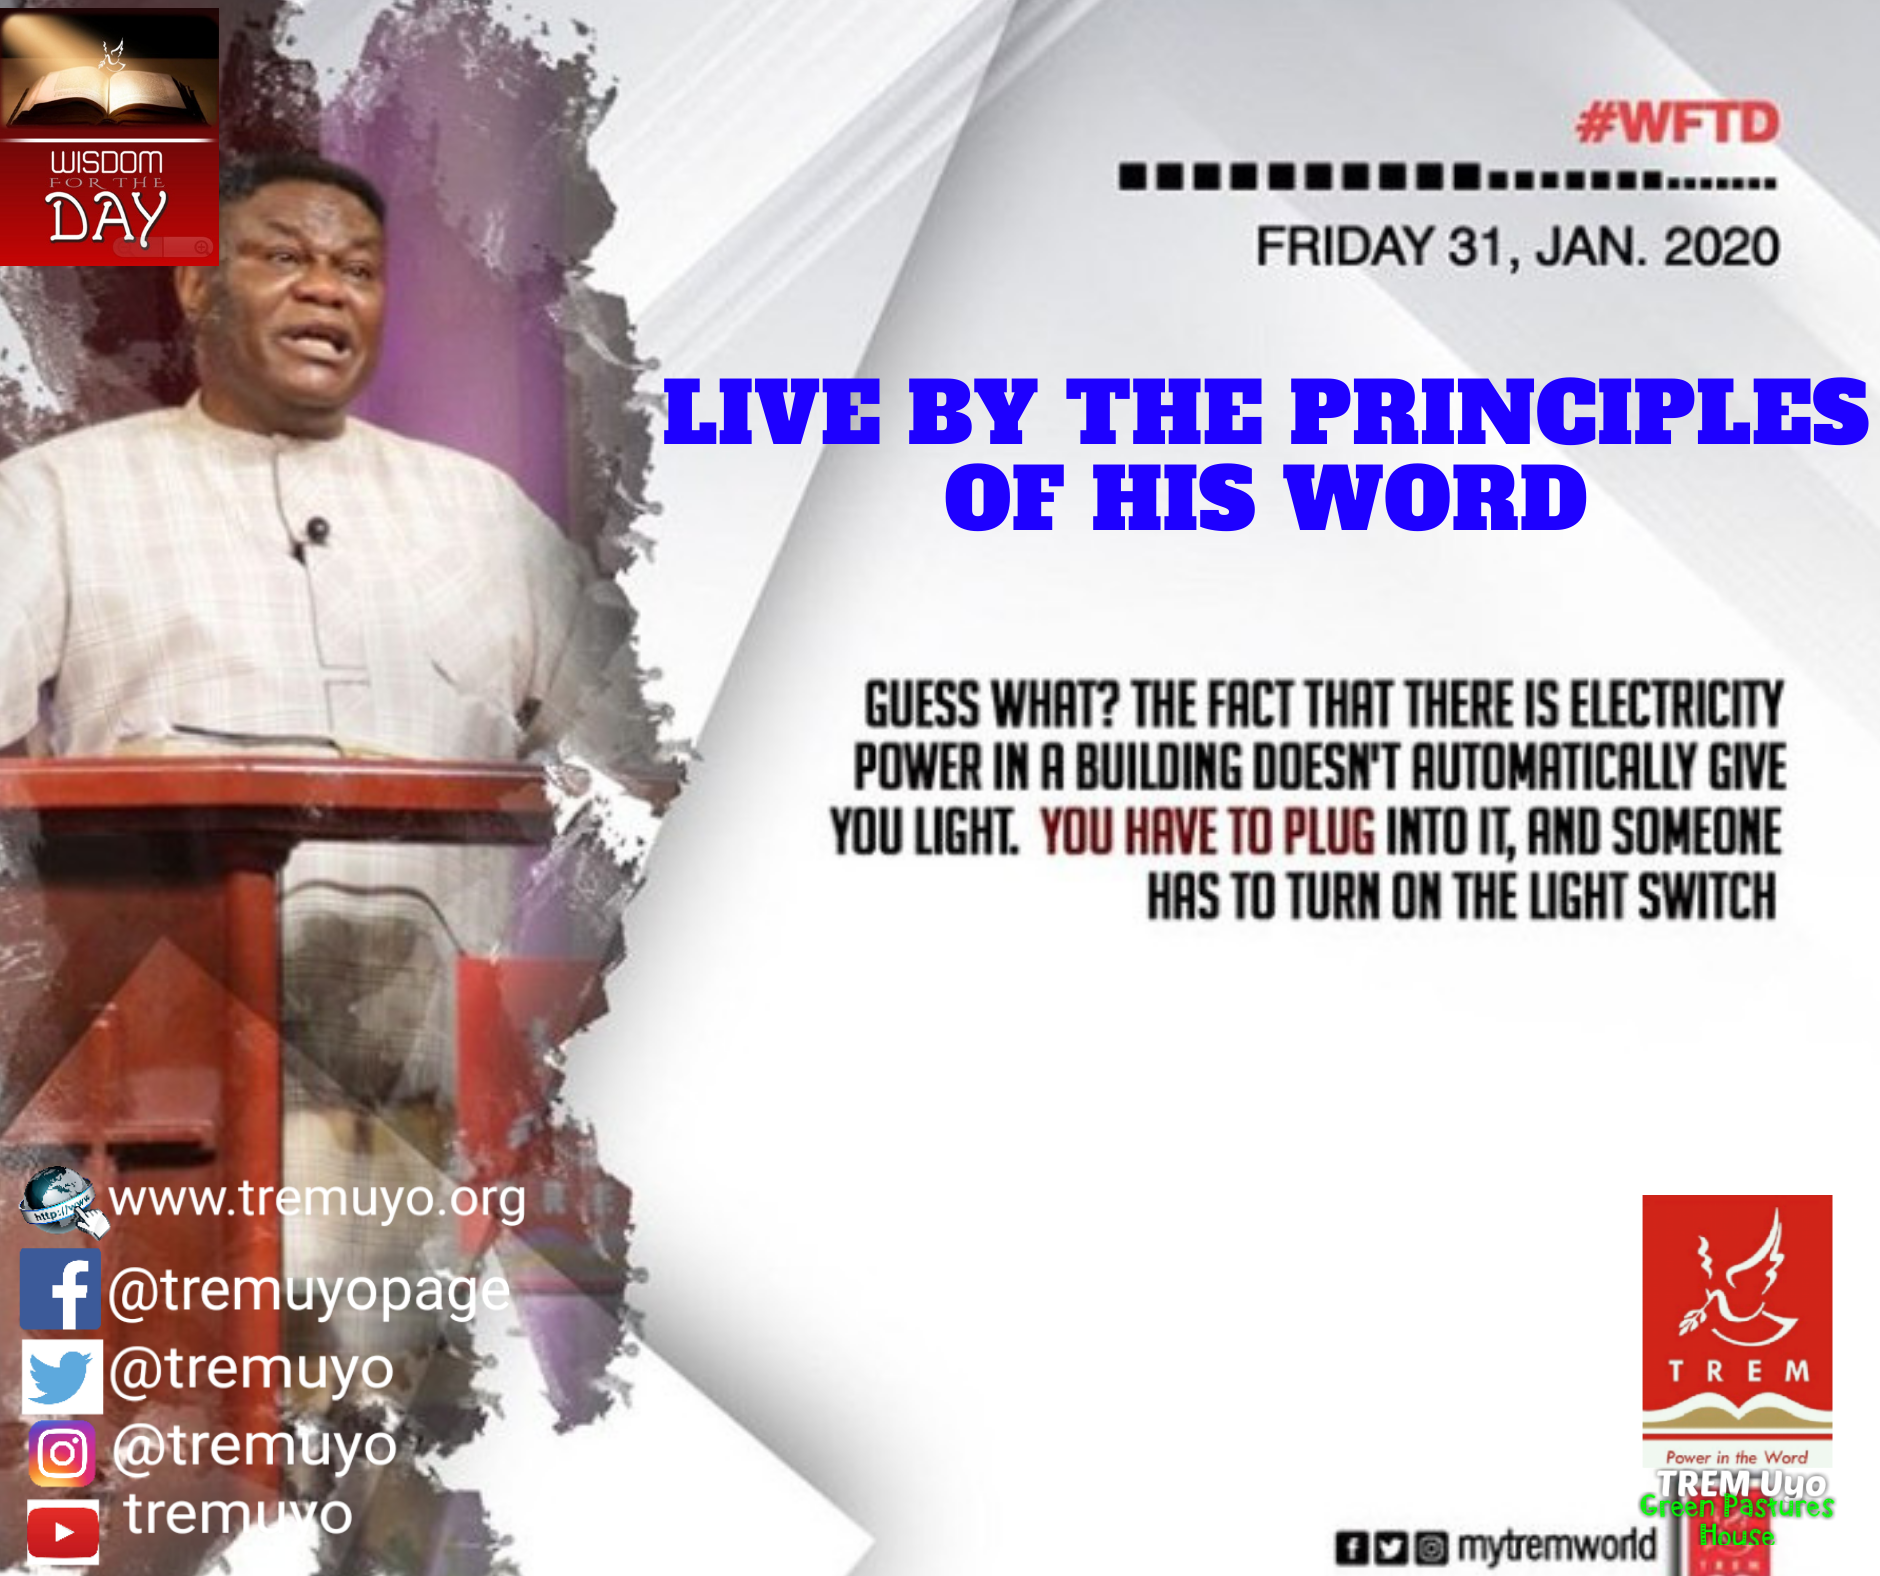 LIVE BY THE PRINCIPLES OF HIS WORD